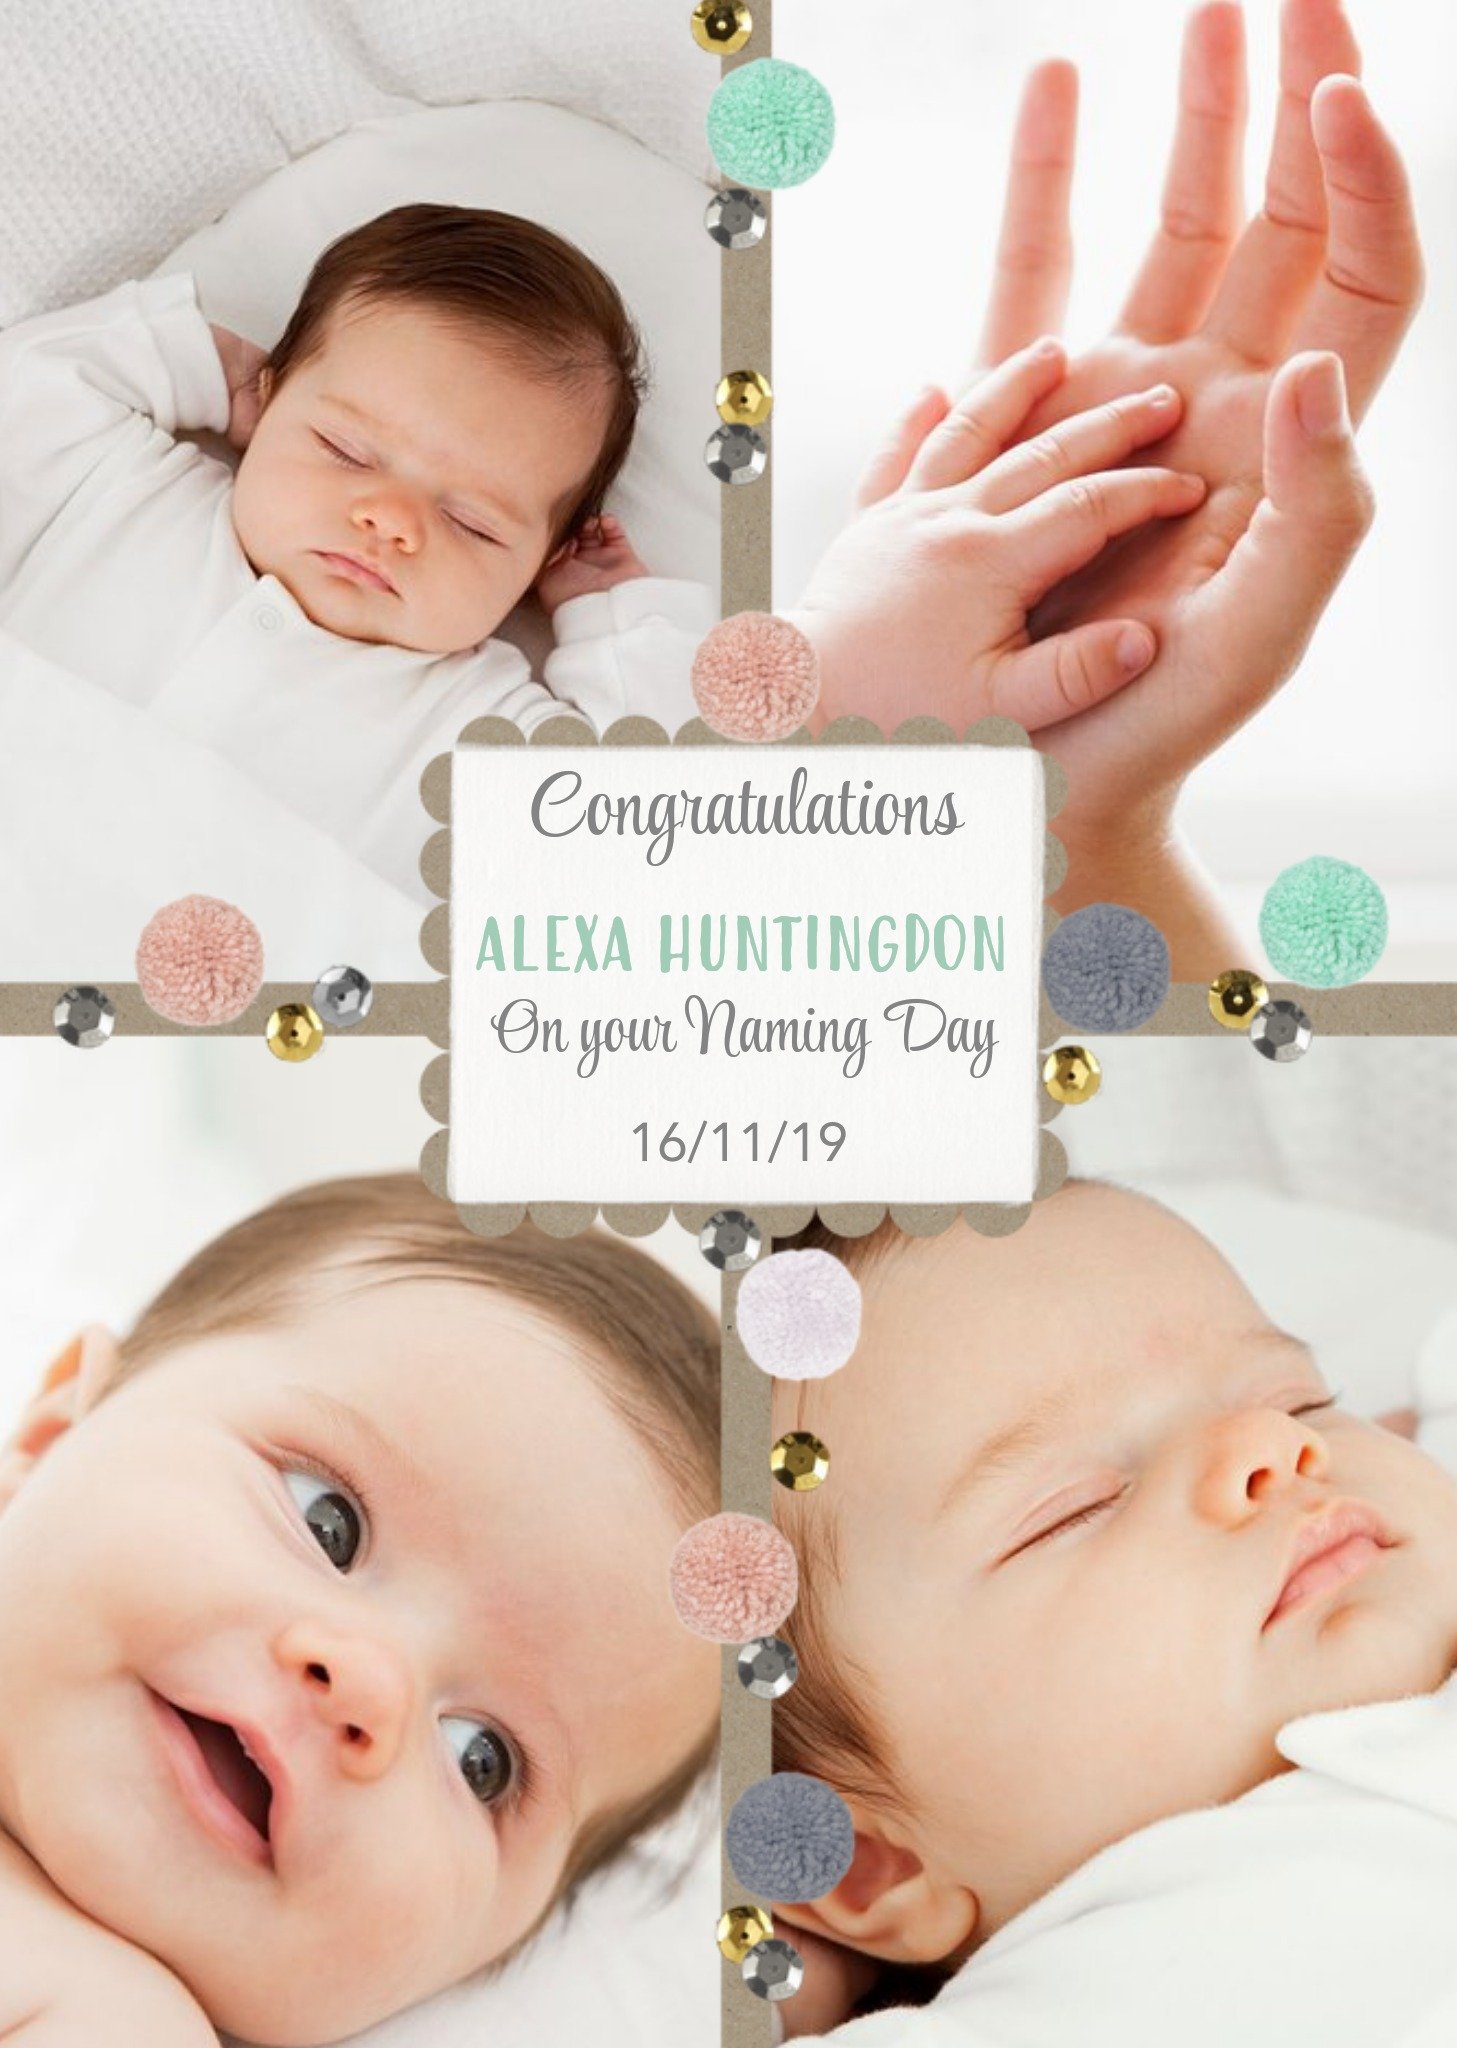 Moonpig Confetti Congratulations On Your Naming Day Photo Card, Large